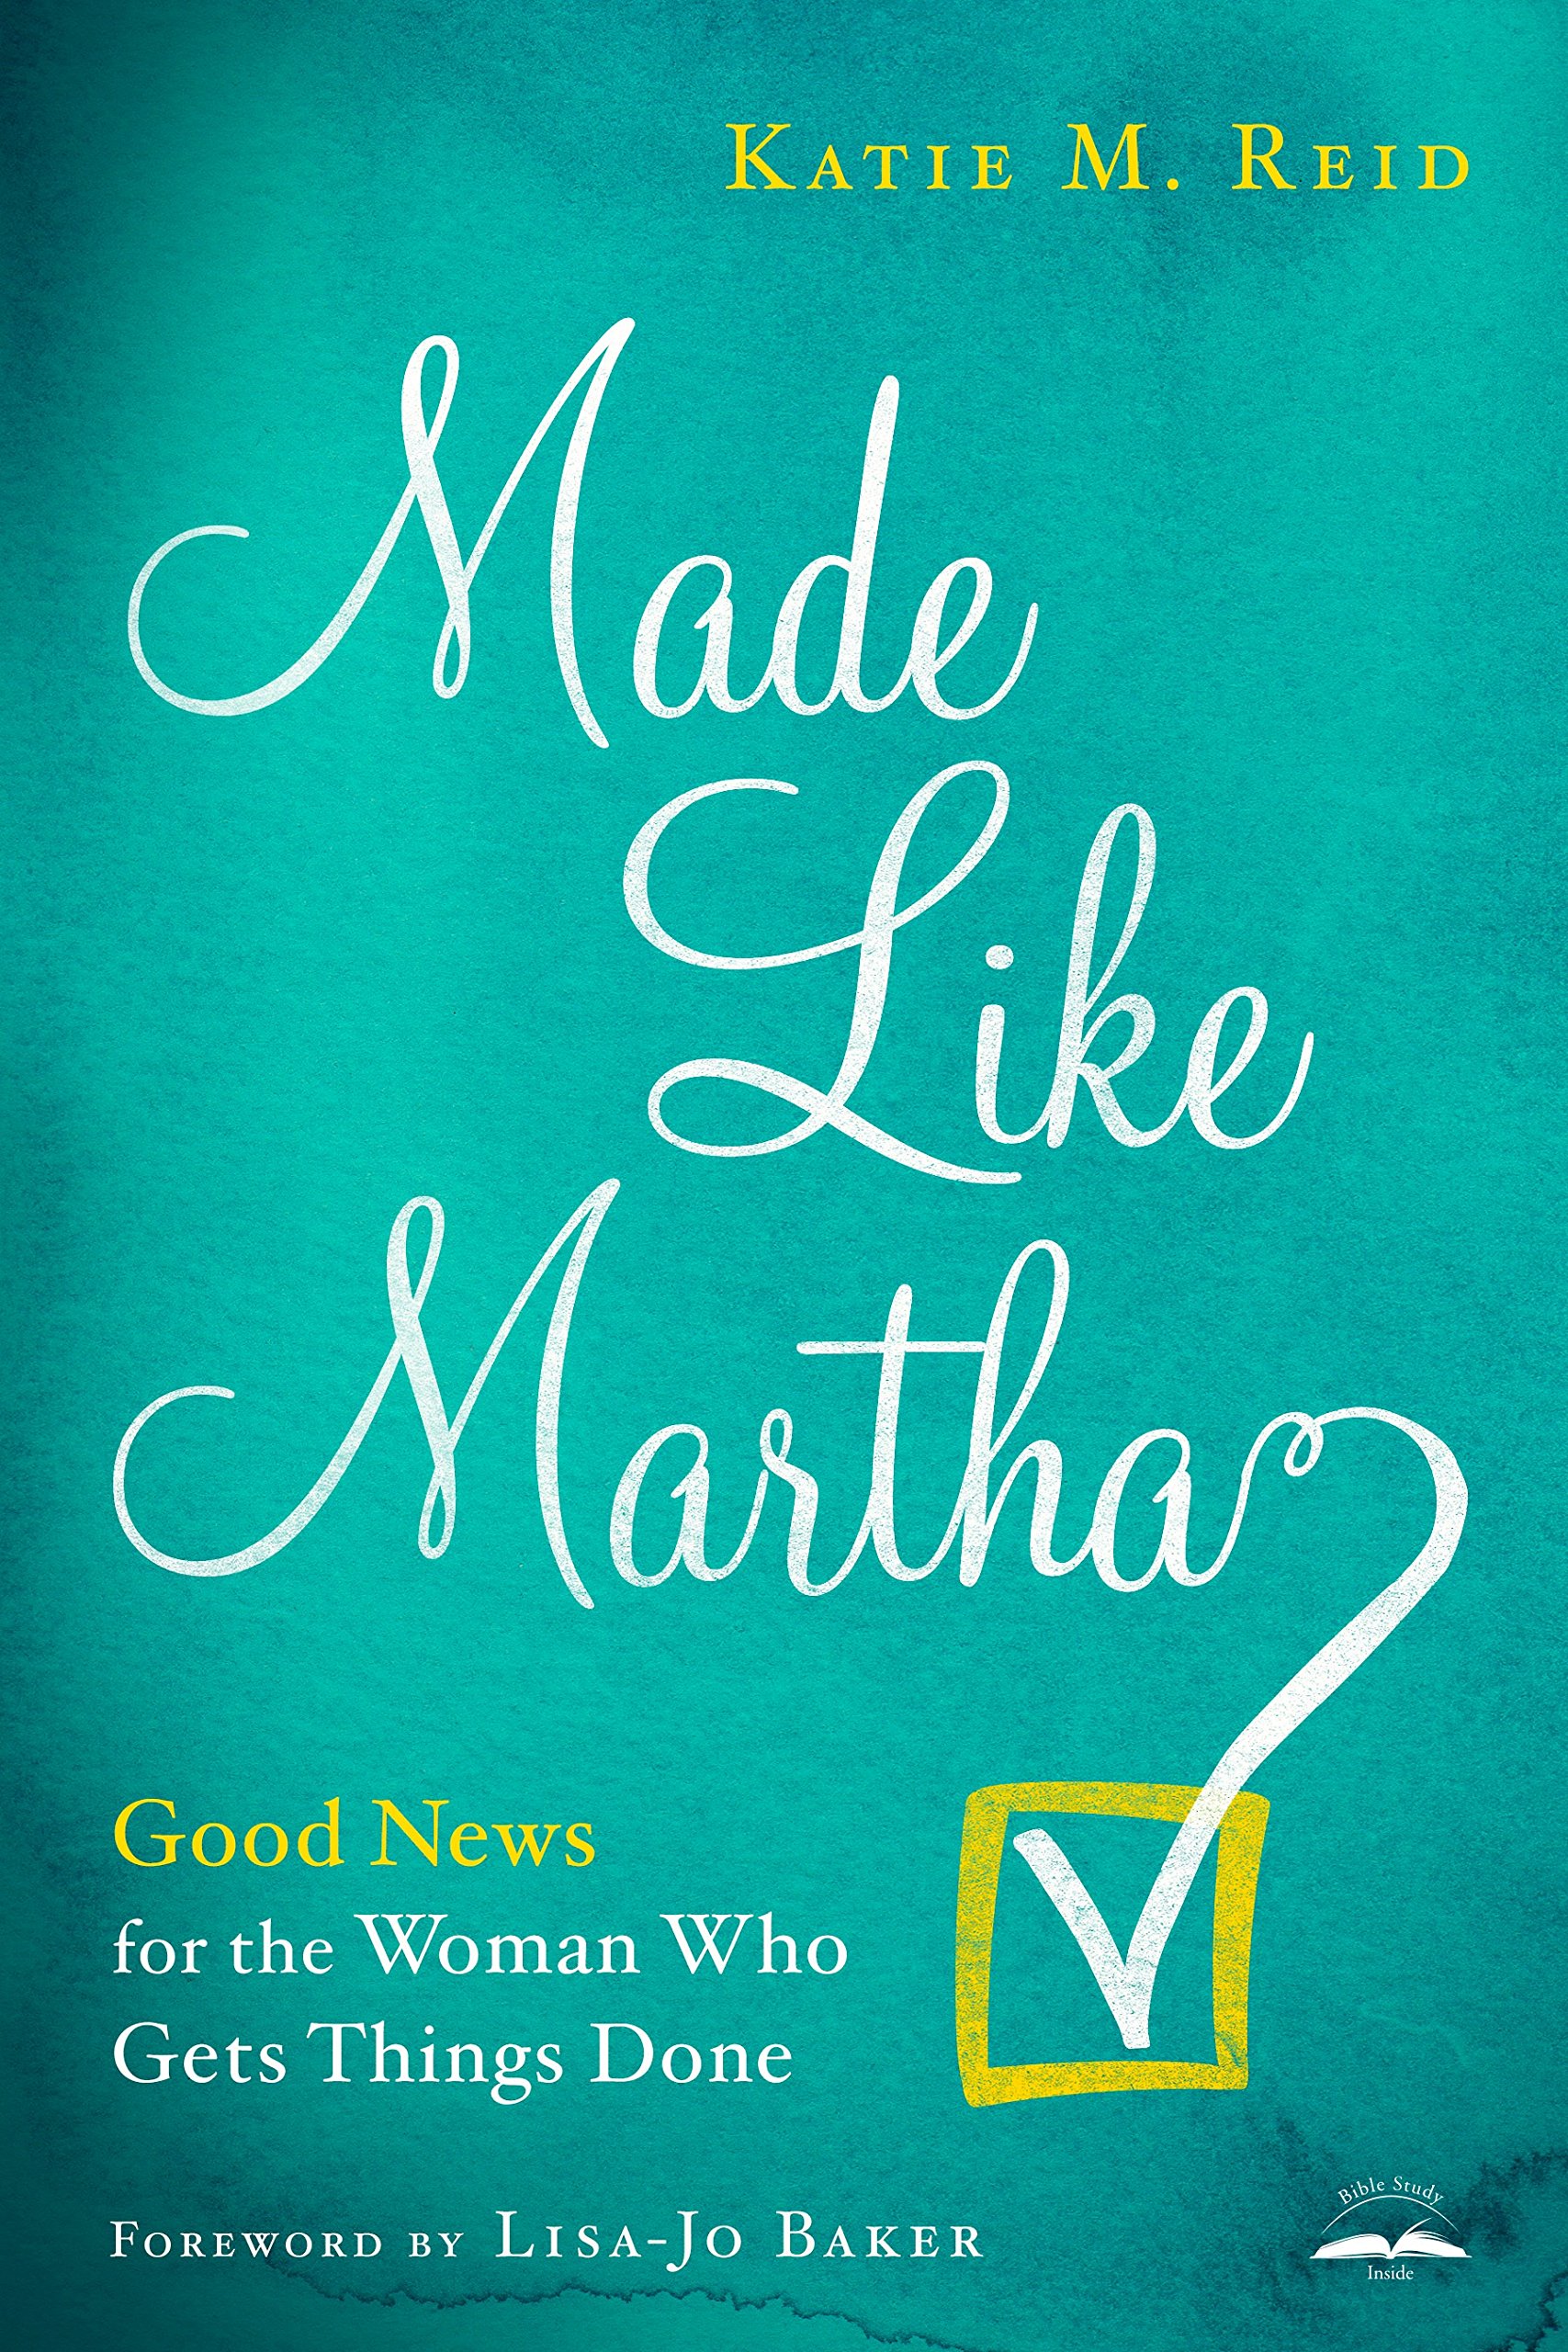 Made Like Martha: Good News for the Woman Who Gets Things Done